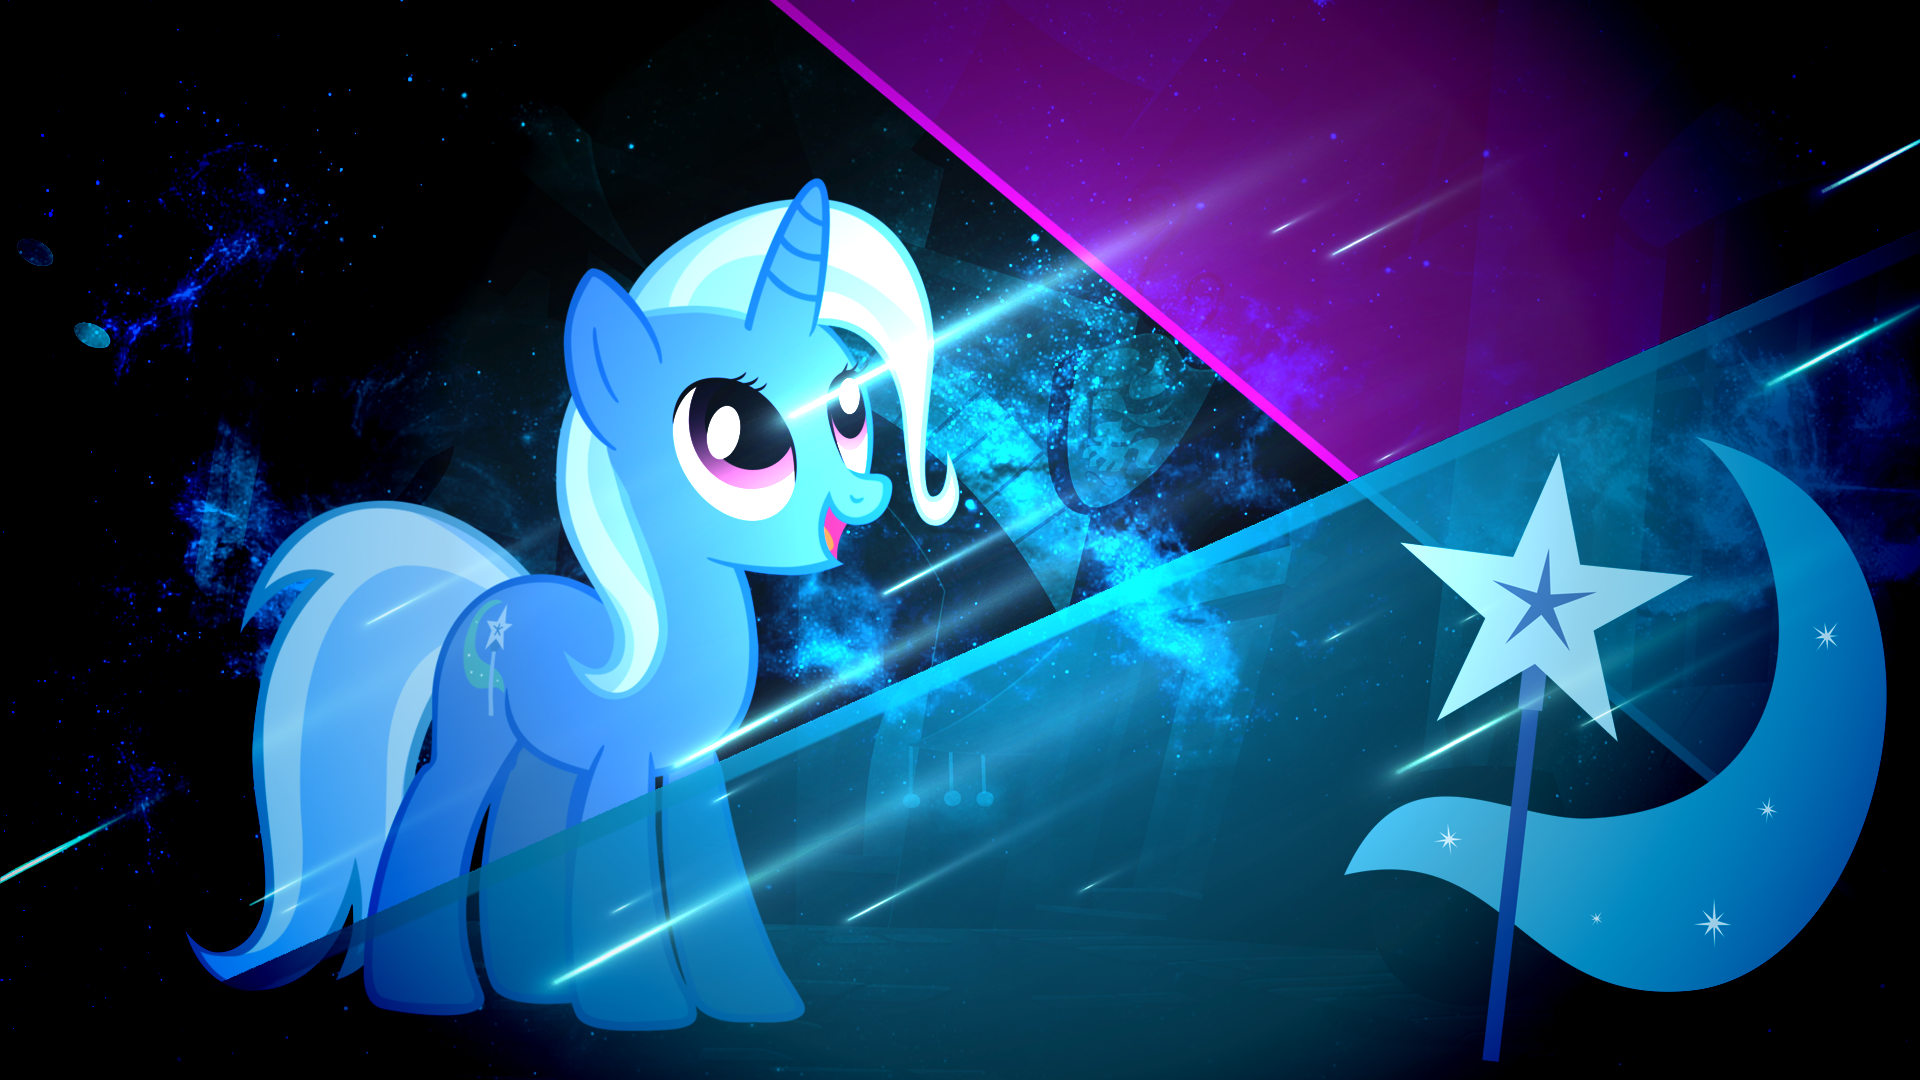 Starlight wallpapers - My Little Pony Friendship is Magic ...